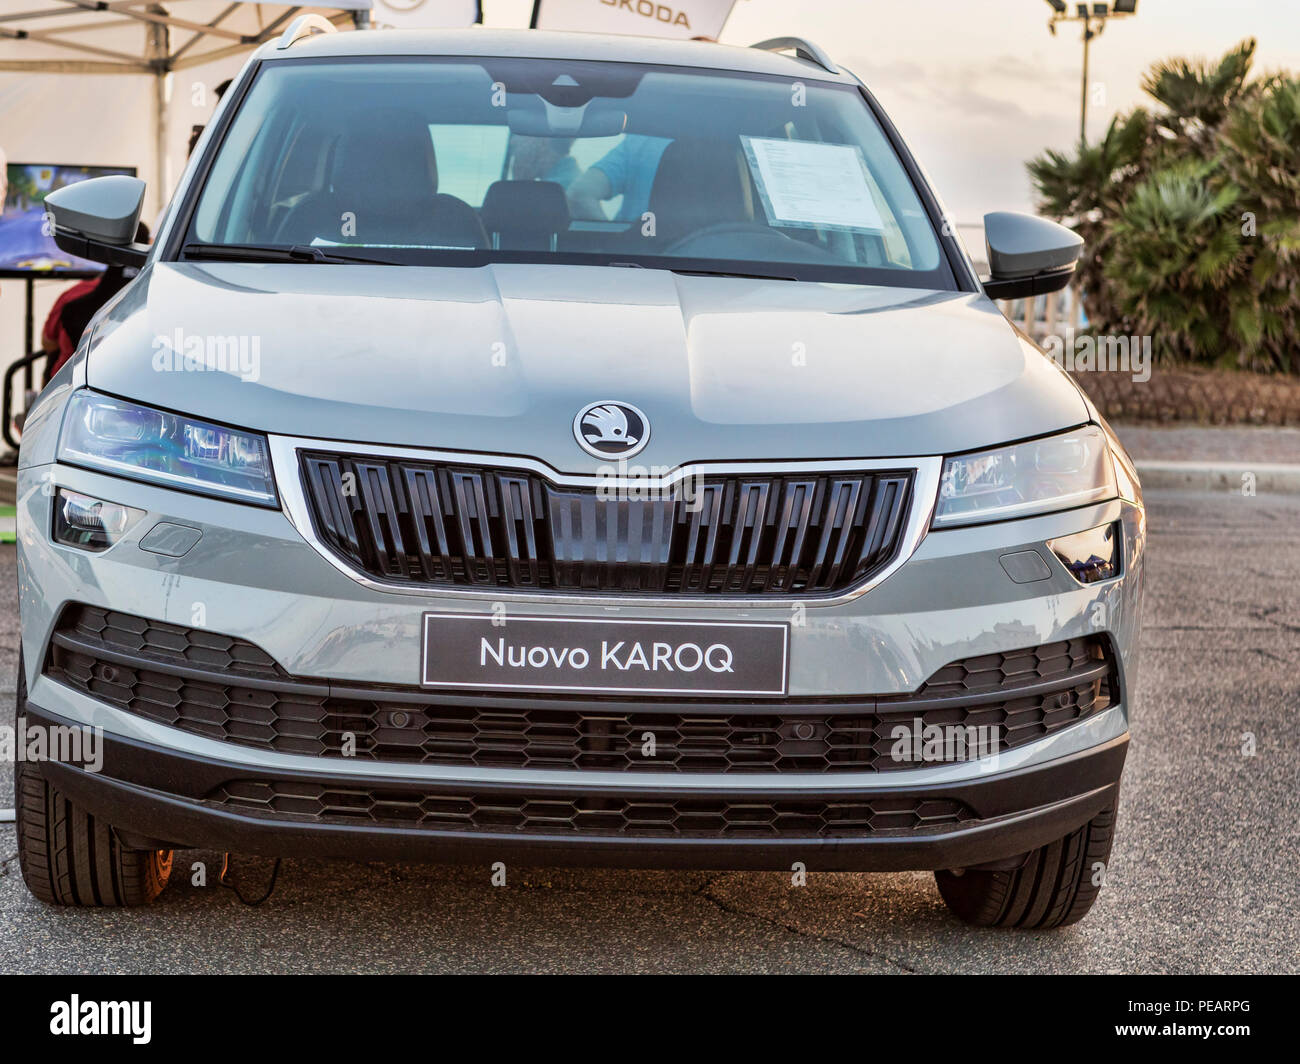 Rome,Italy - July 21, 2018:On occasion of  Rome s Rally event, the motor showrooms exhibit new cars models: A new KAROQ car from Skoda automaker. Stock Photo